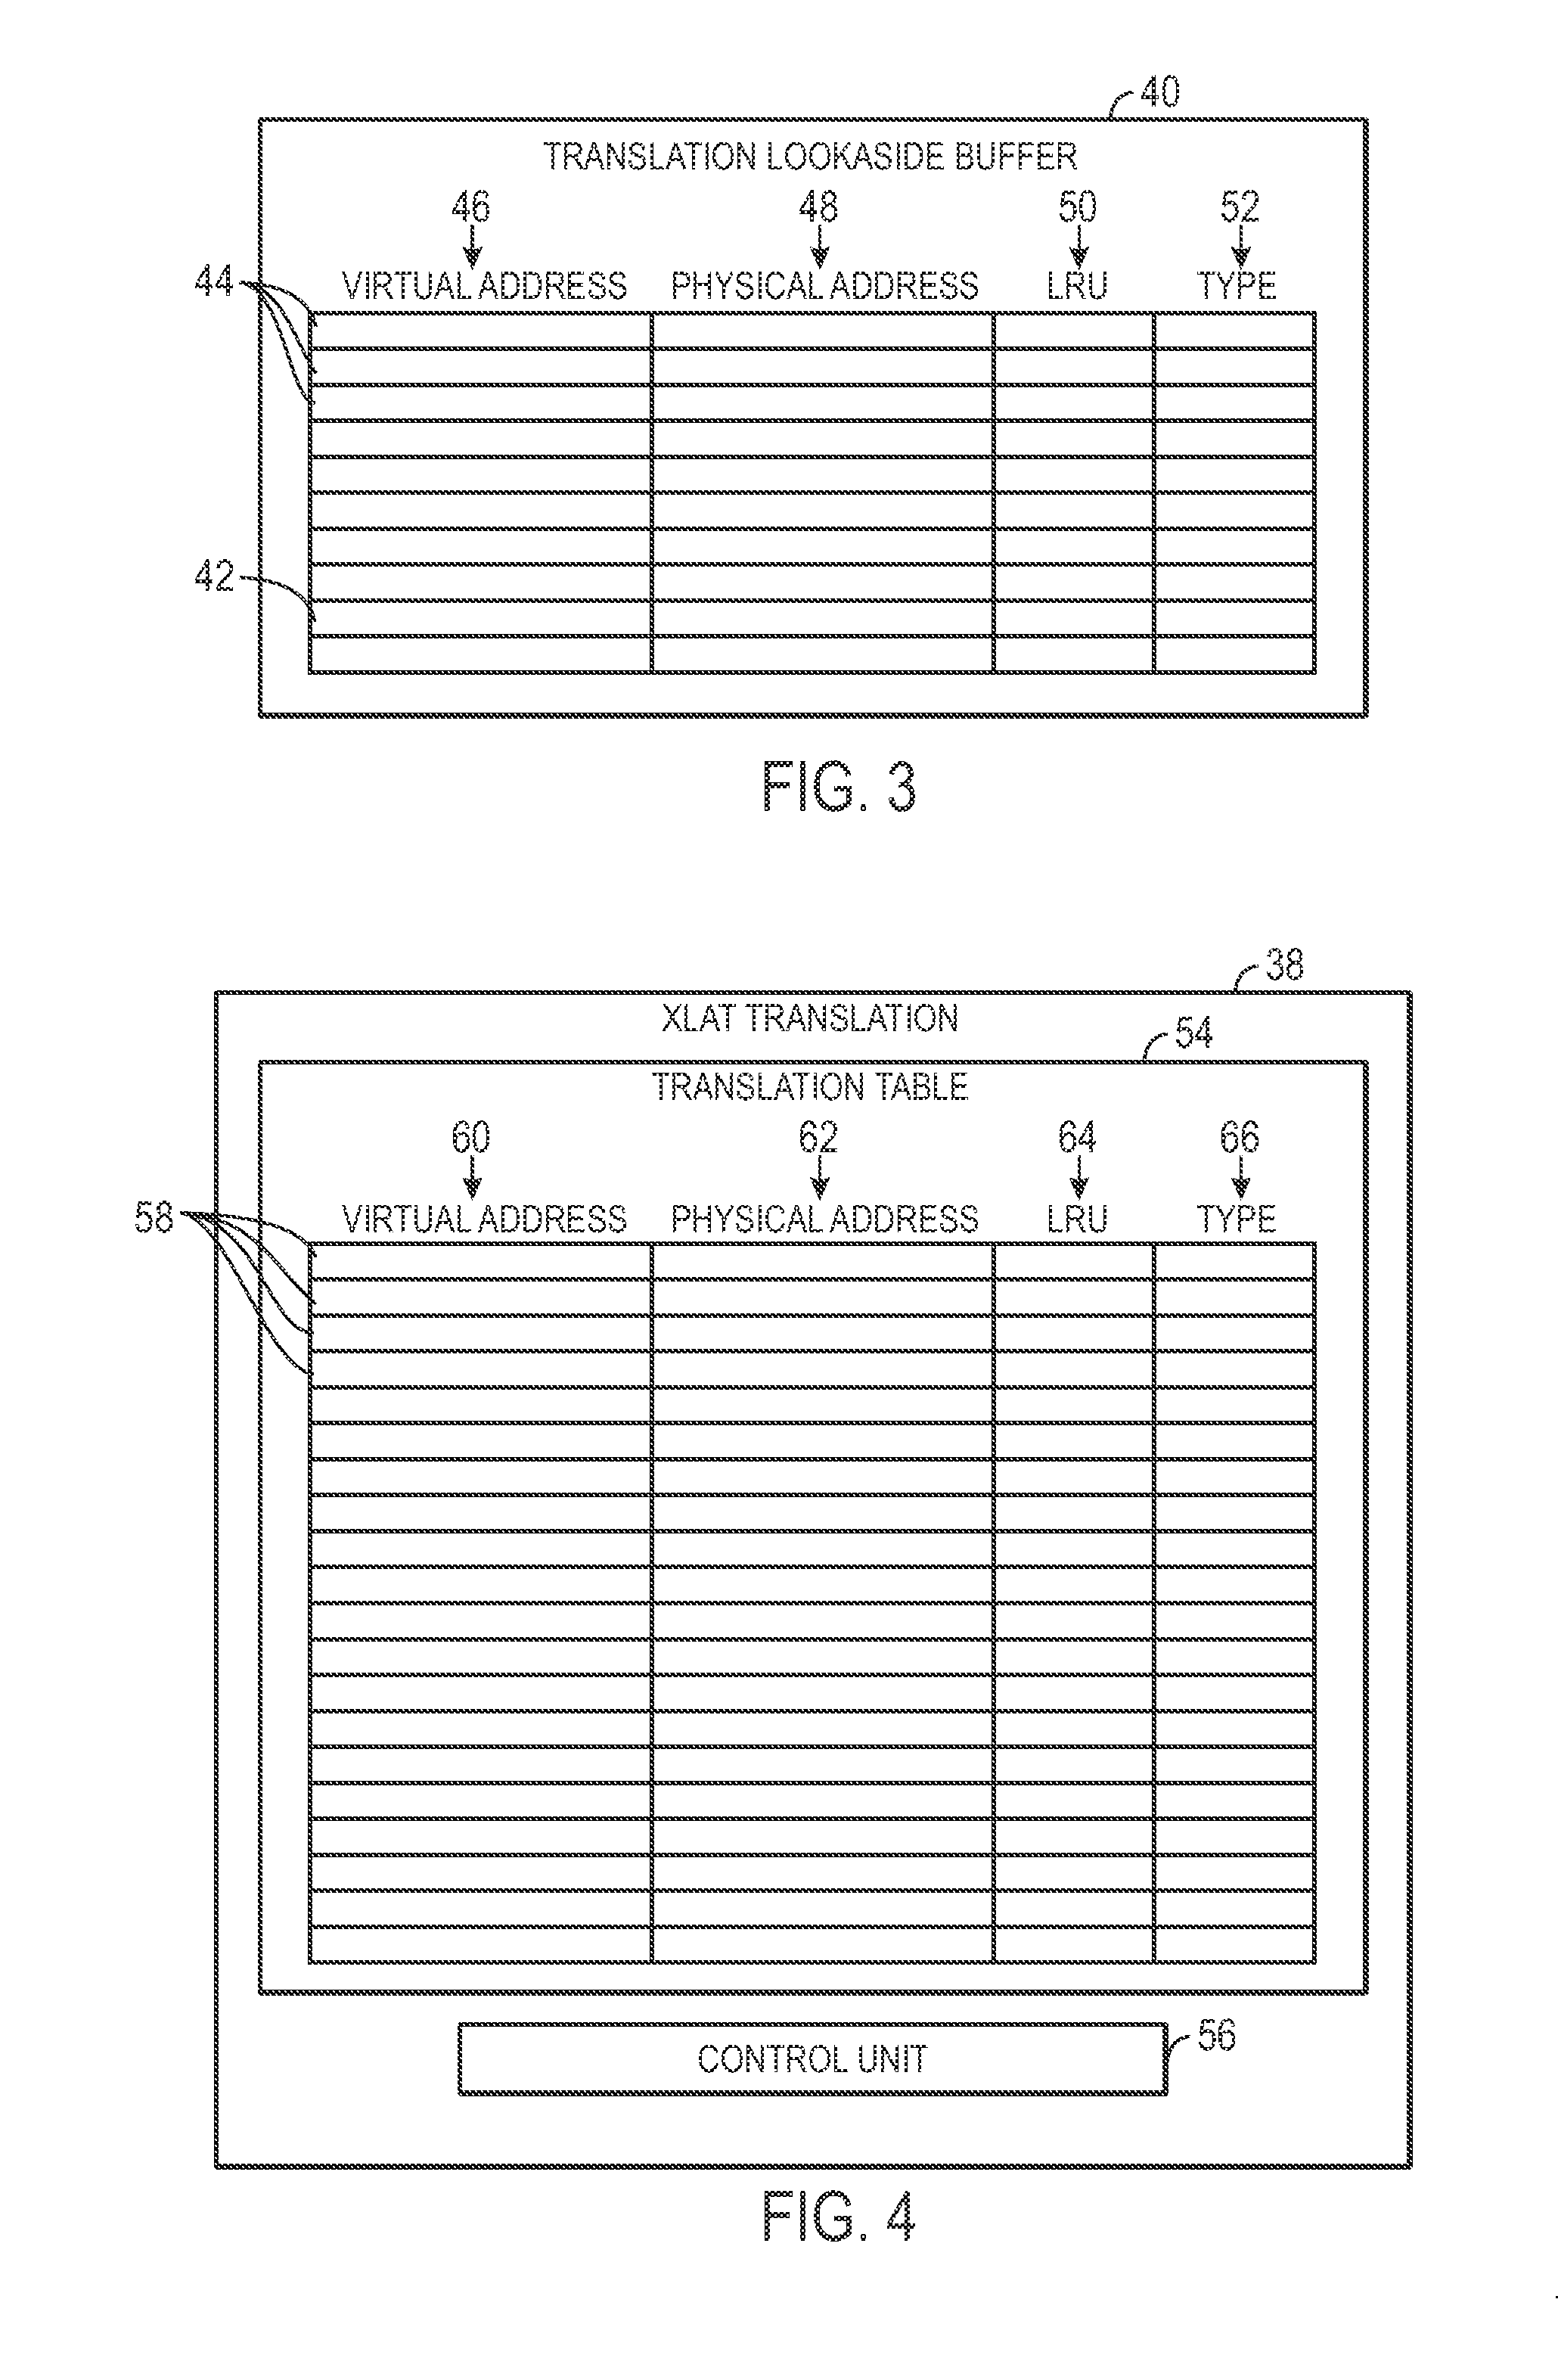 Memory management for a hierarchical memory system